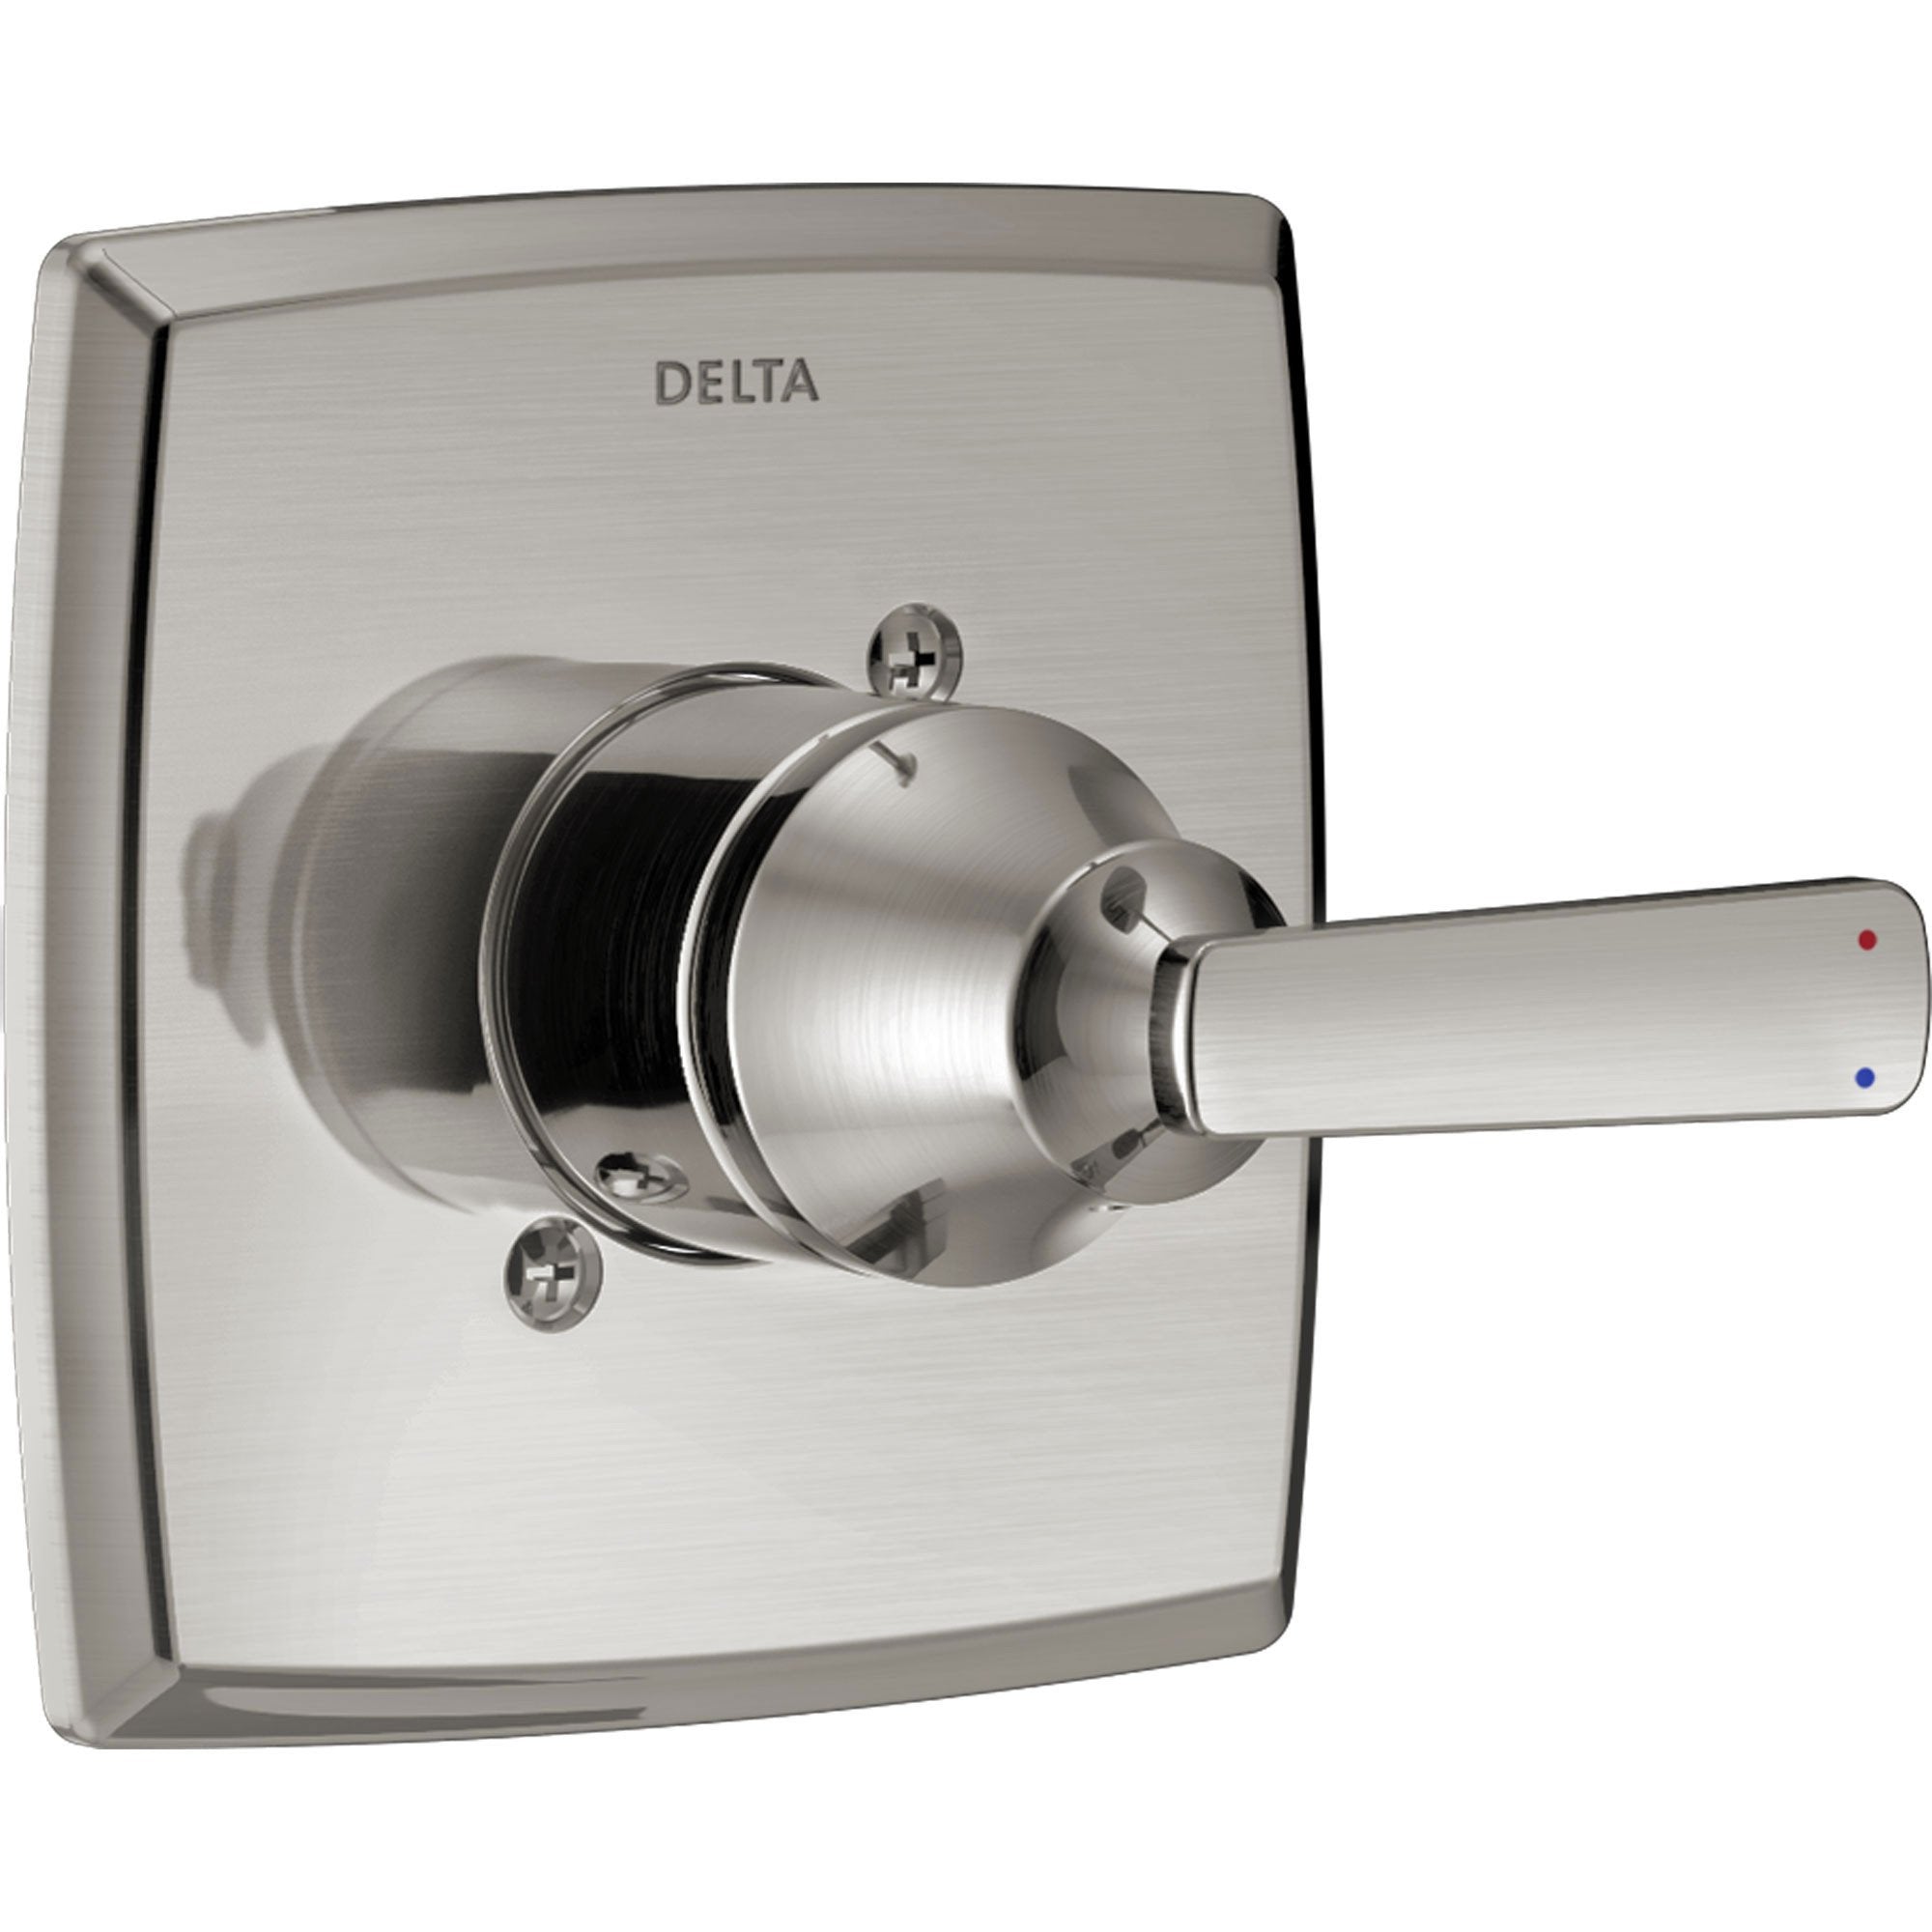 Delta Ashlyn 14 Series Modern Stainless Steel Finish Single Handle Pressure Balanced Shower Faucet Control INCLUDES Rough-in Valve with Stops D1257V